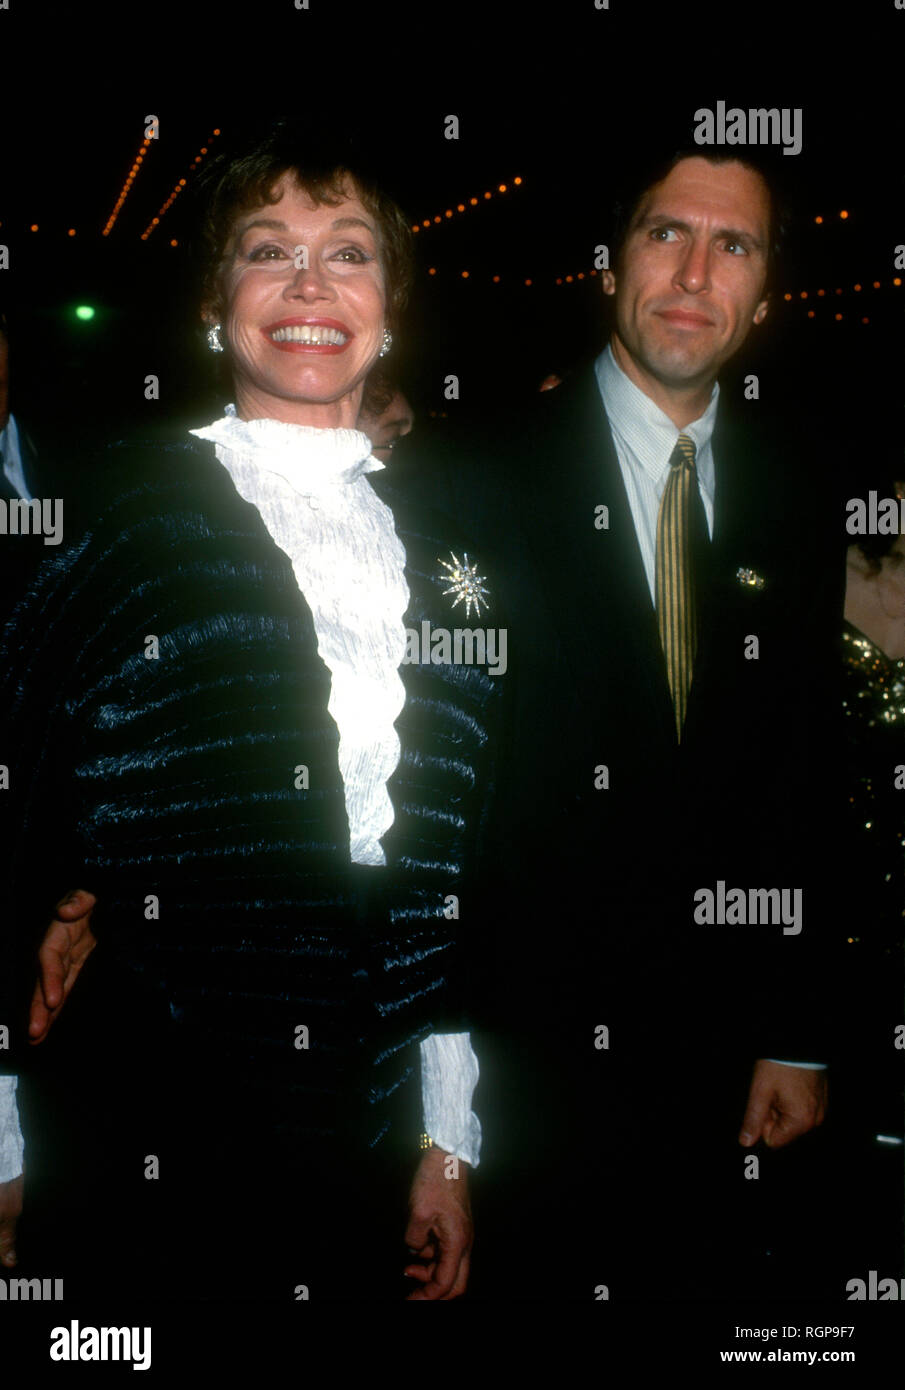 CENTURY CITY,  CA - NOVEMBER 30: Actress Mary Tyler Moore and husband Robert Levine attend Opening Night of 'Sunset Boulevard' on November 30, 1993 at the Shubert Theater in Century City, California. Photo by Barry King/Alamy Stock Photo Stock Photo